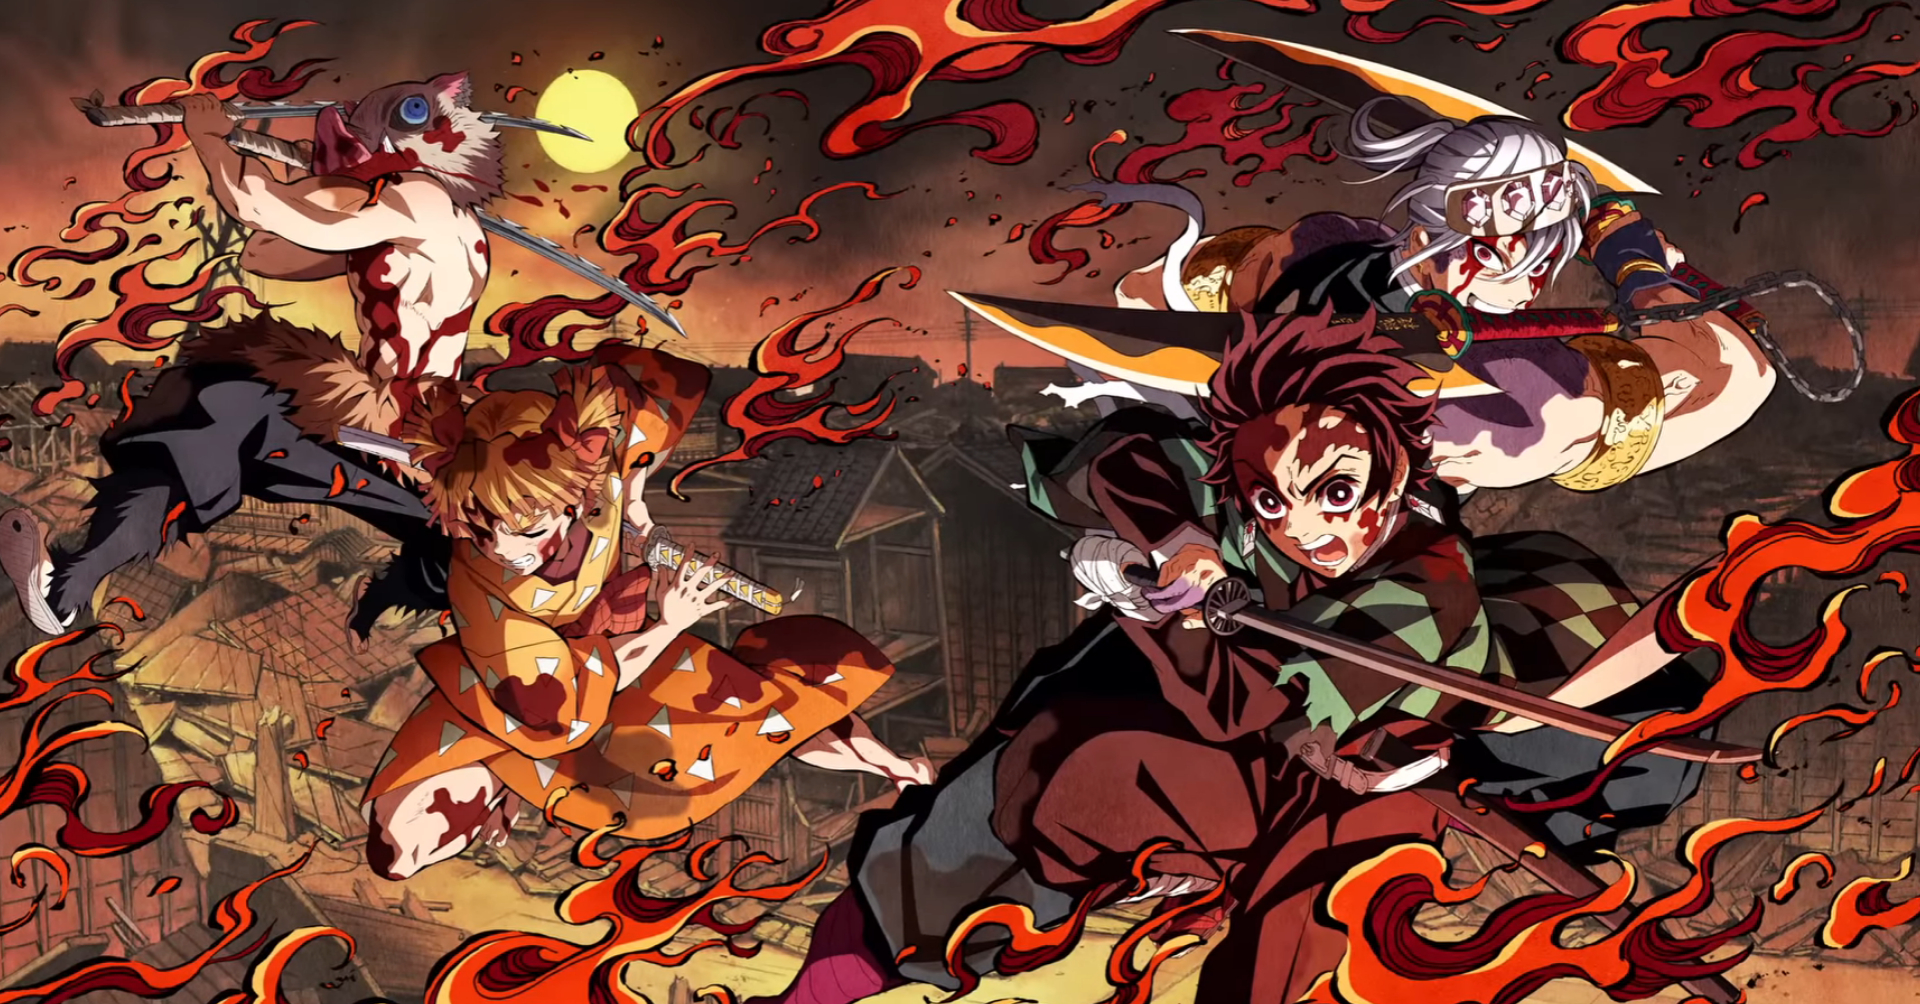 How to Watch Demon Slayer: Entertainment District Arc online from anywhere